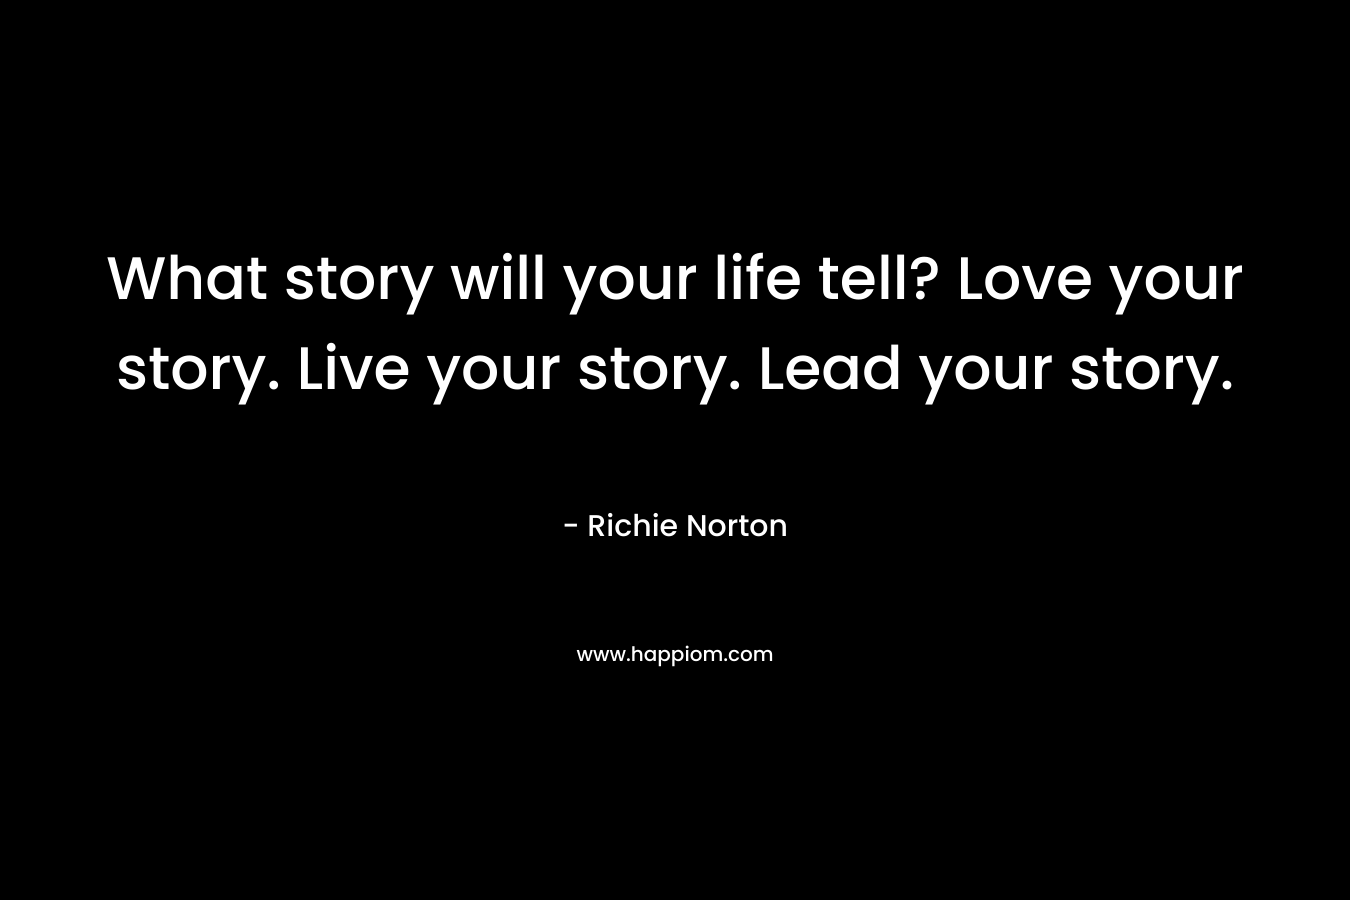 What story will your life tell? Love your story. Live your story. Lead your story.